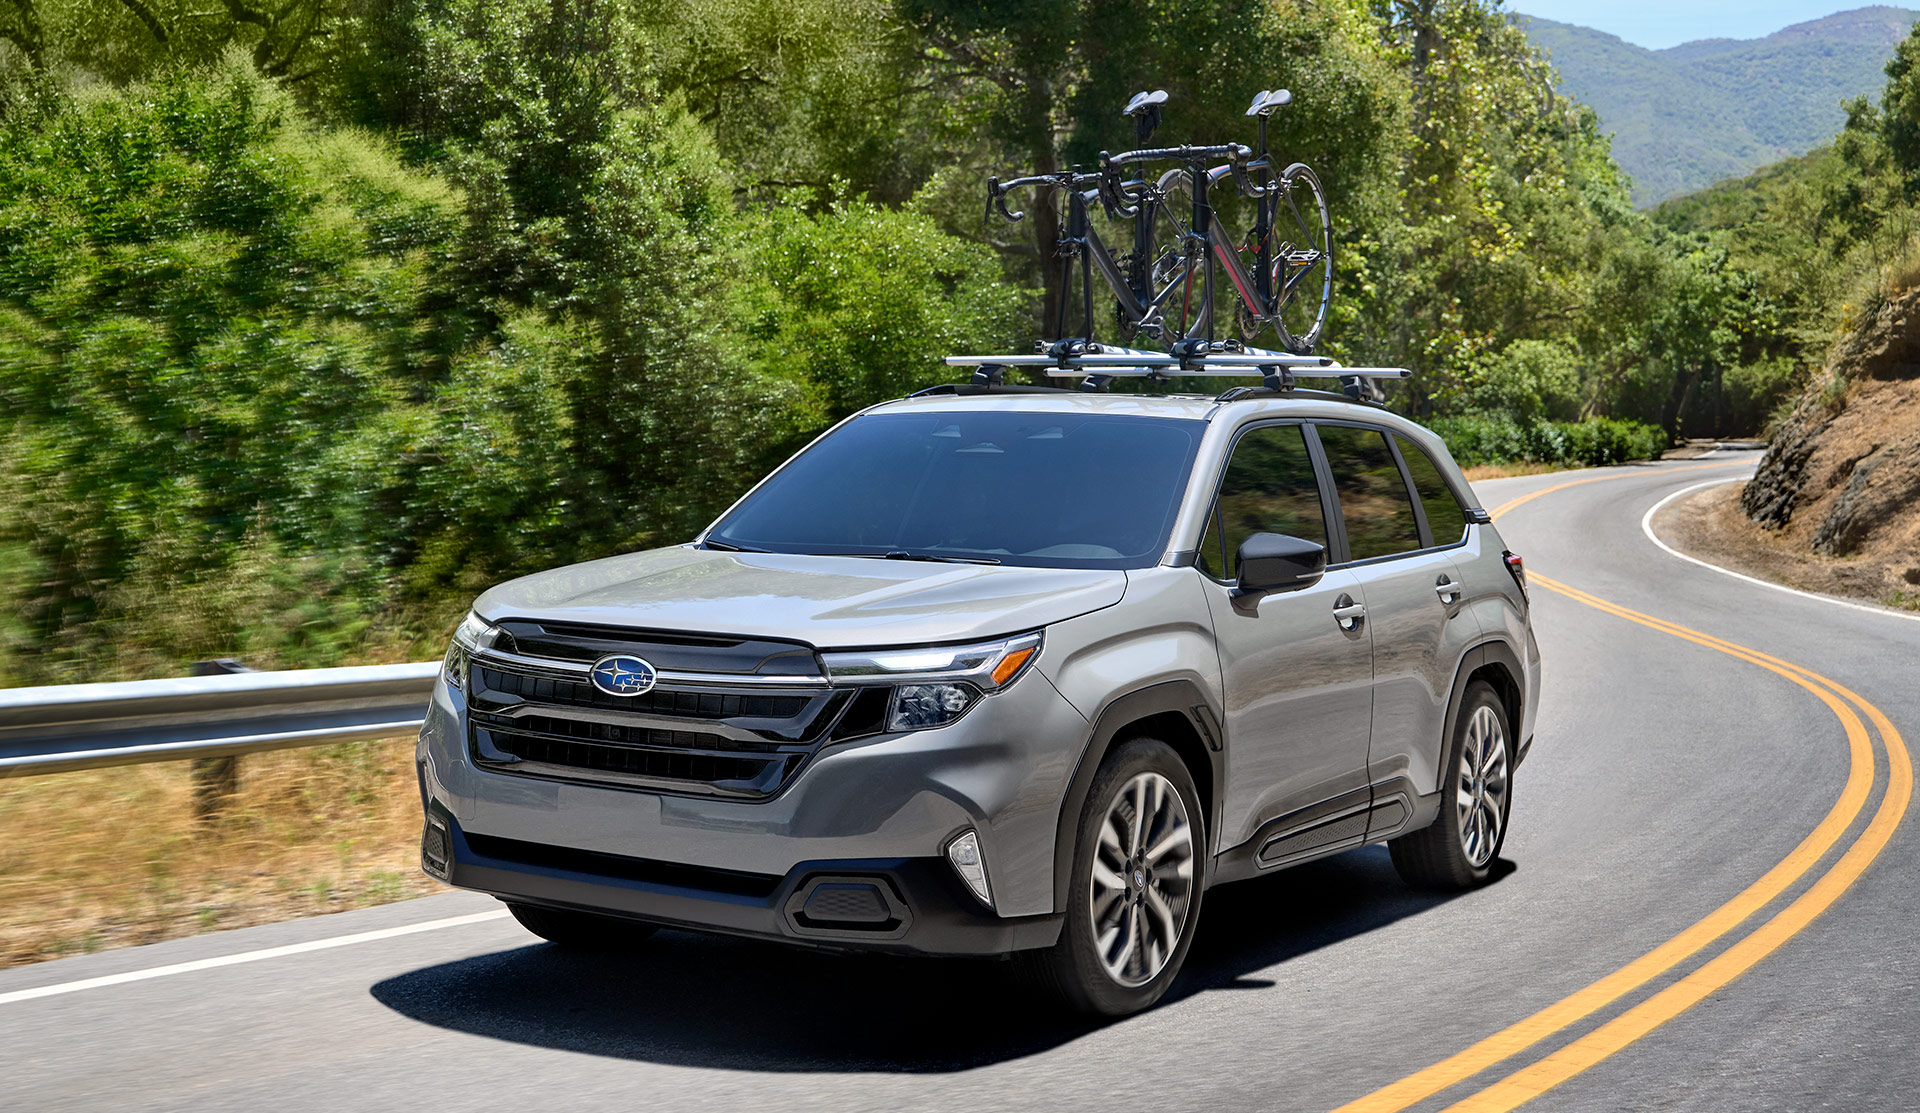 2025 Subaru Forester driving on a rural road.